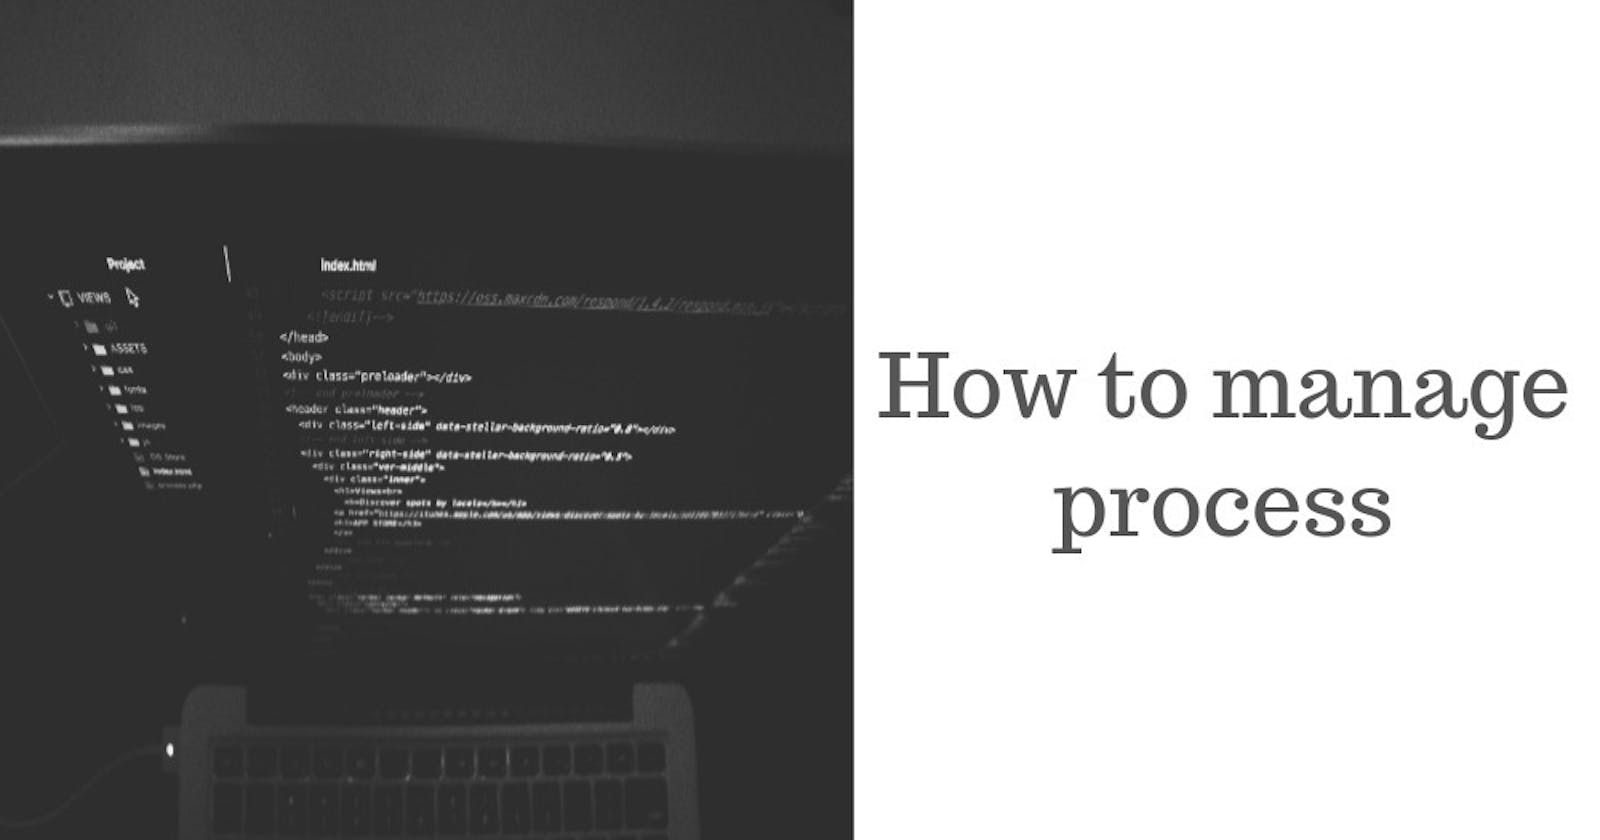 How to manage background processes in Linux